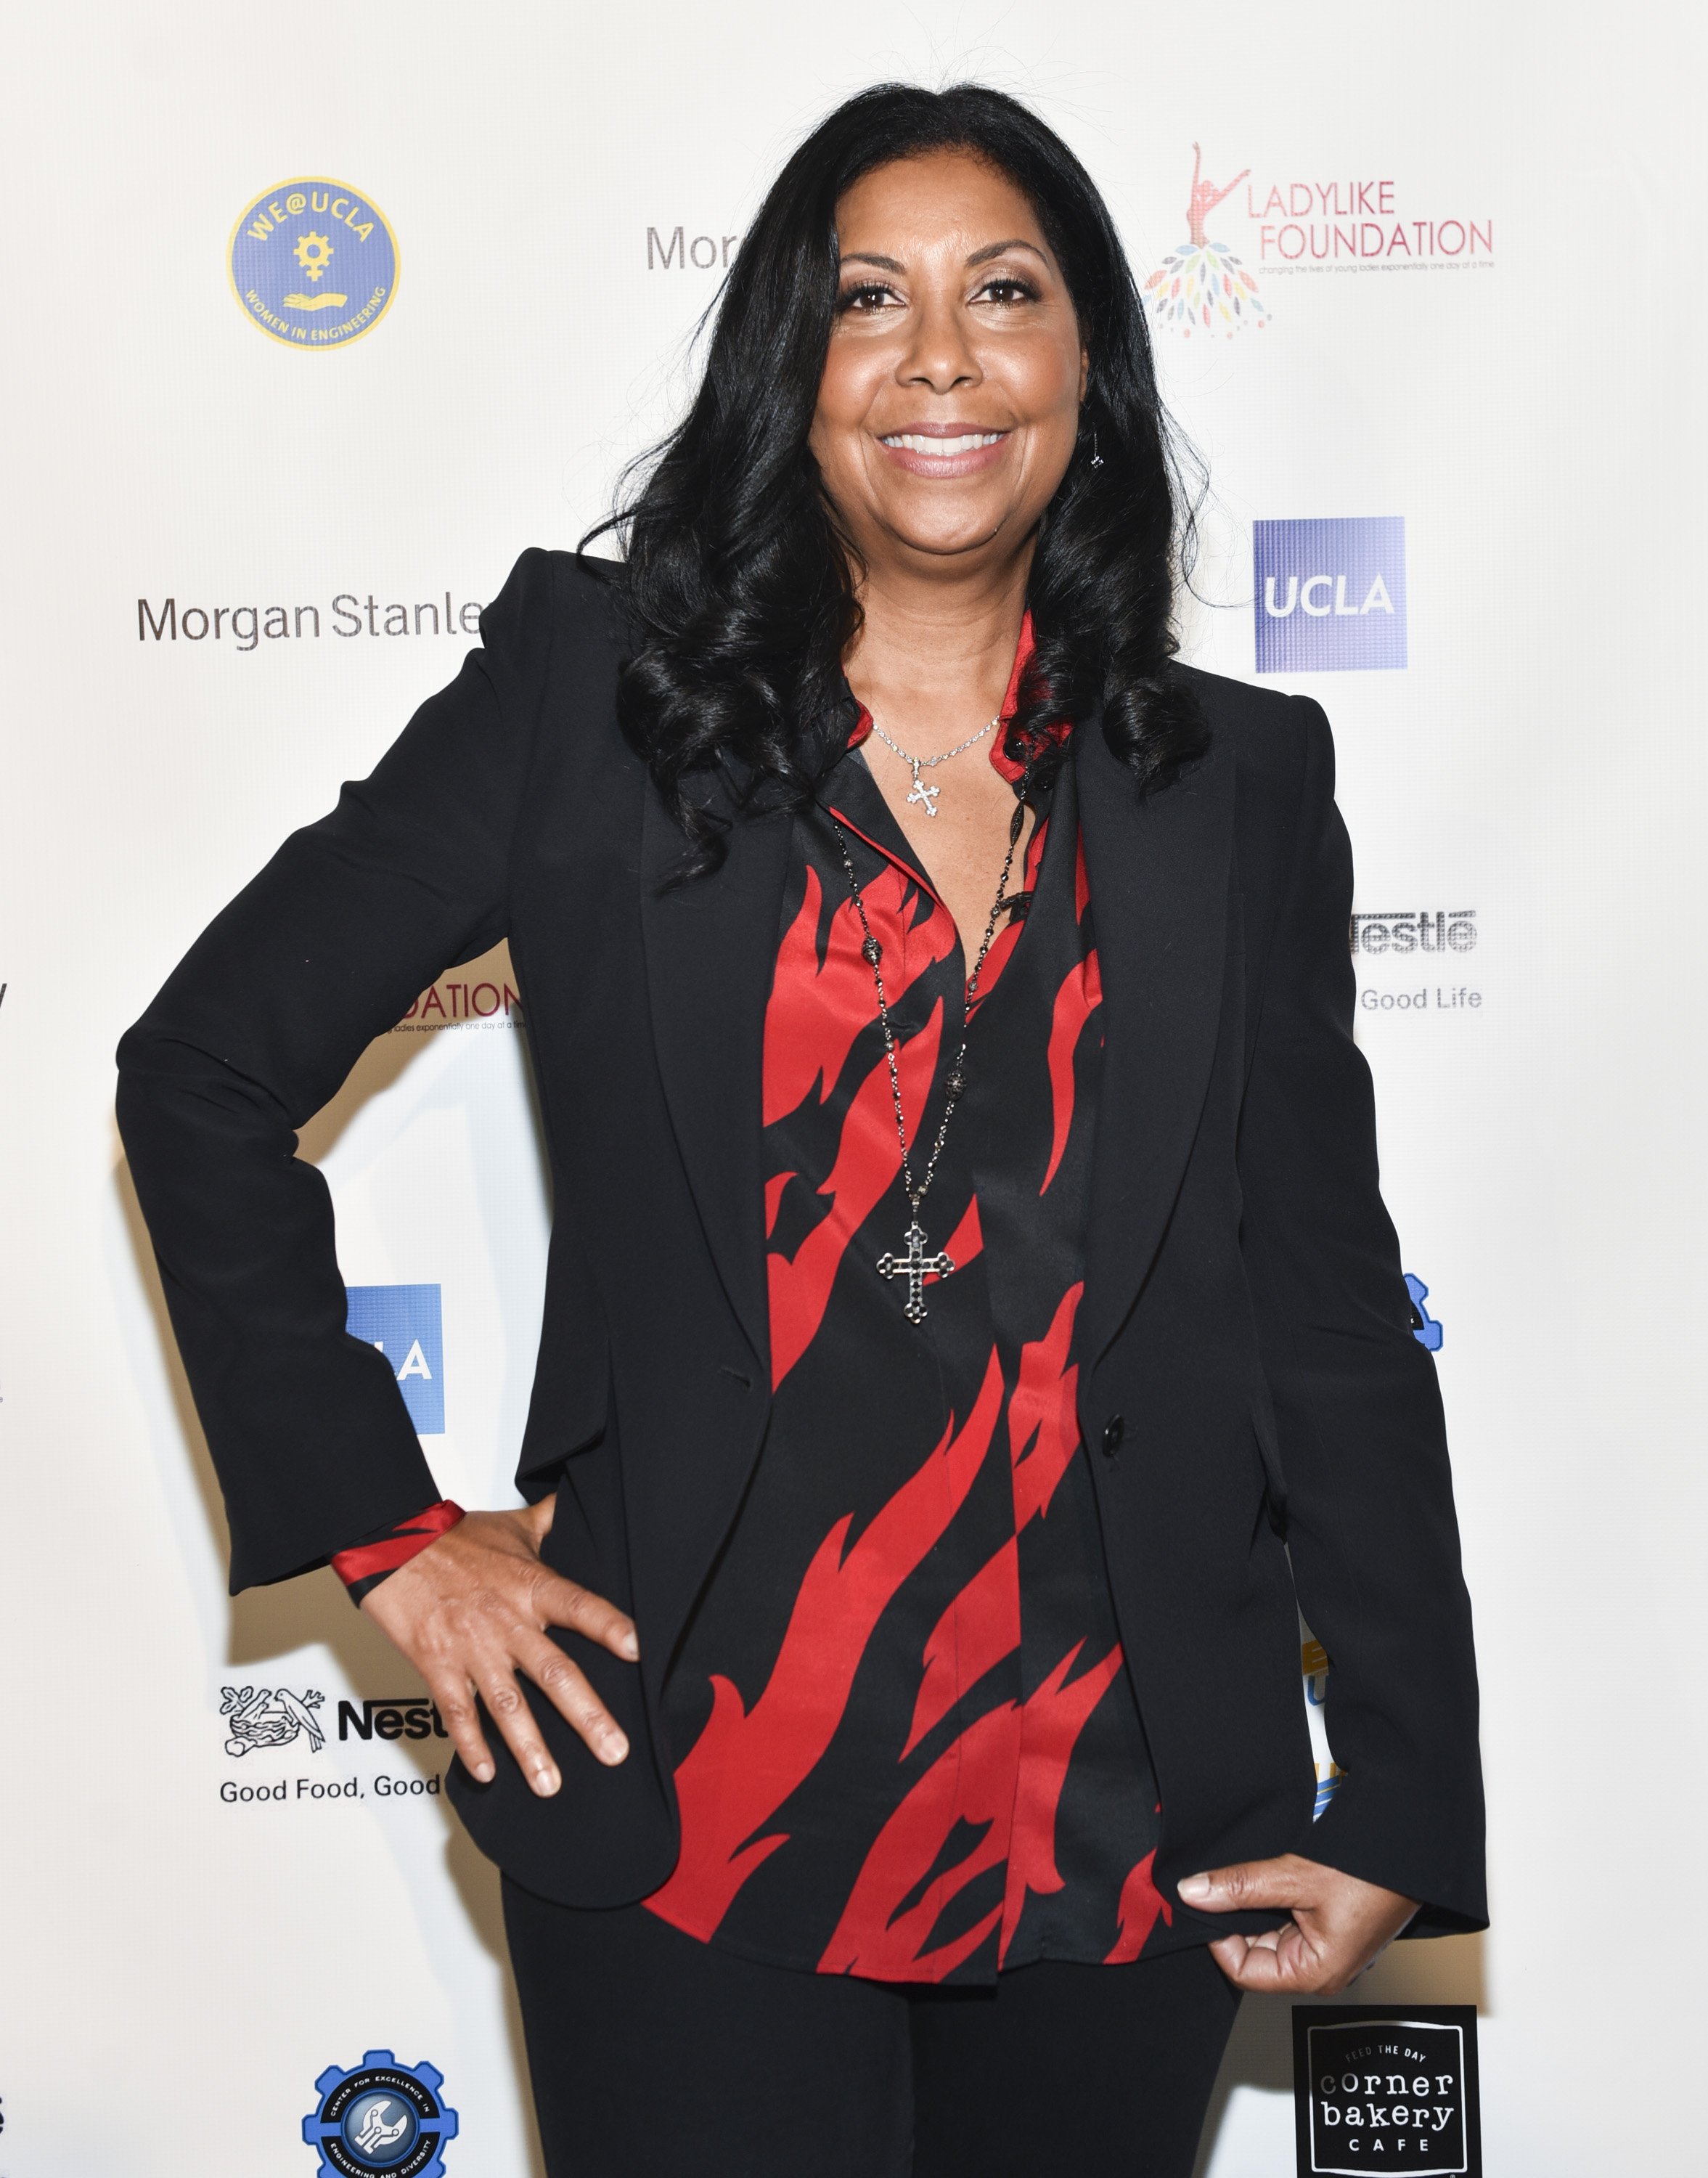 Cookie Johnson at the 6th Annual Ladylike Day at UCLA Panel and Program on Dec. 16, 2017 in California | Photo: Getty Images